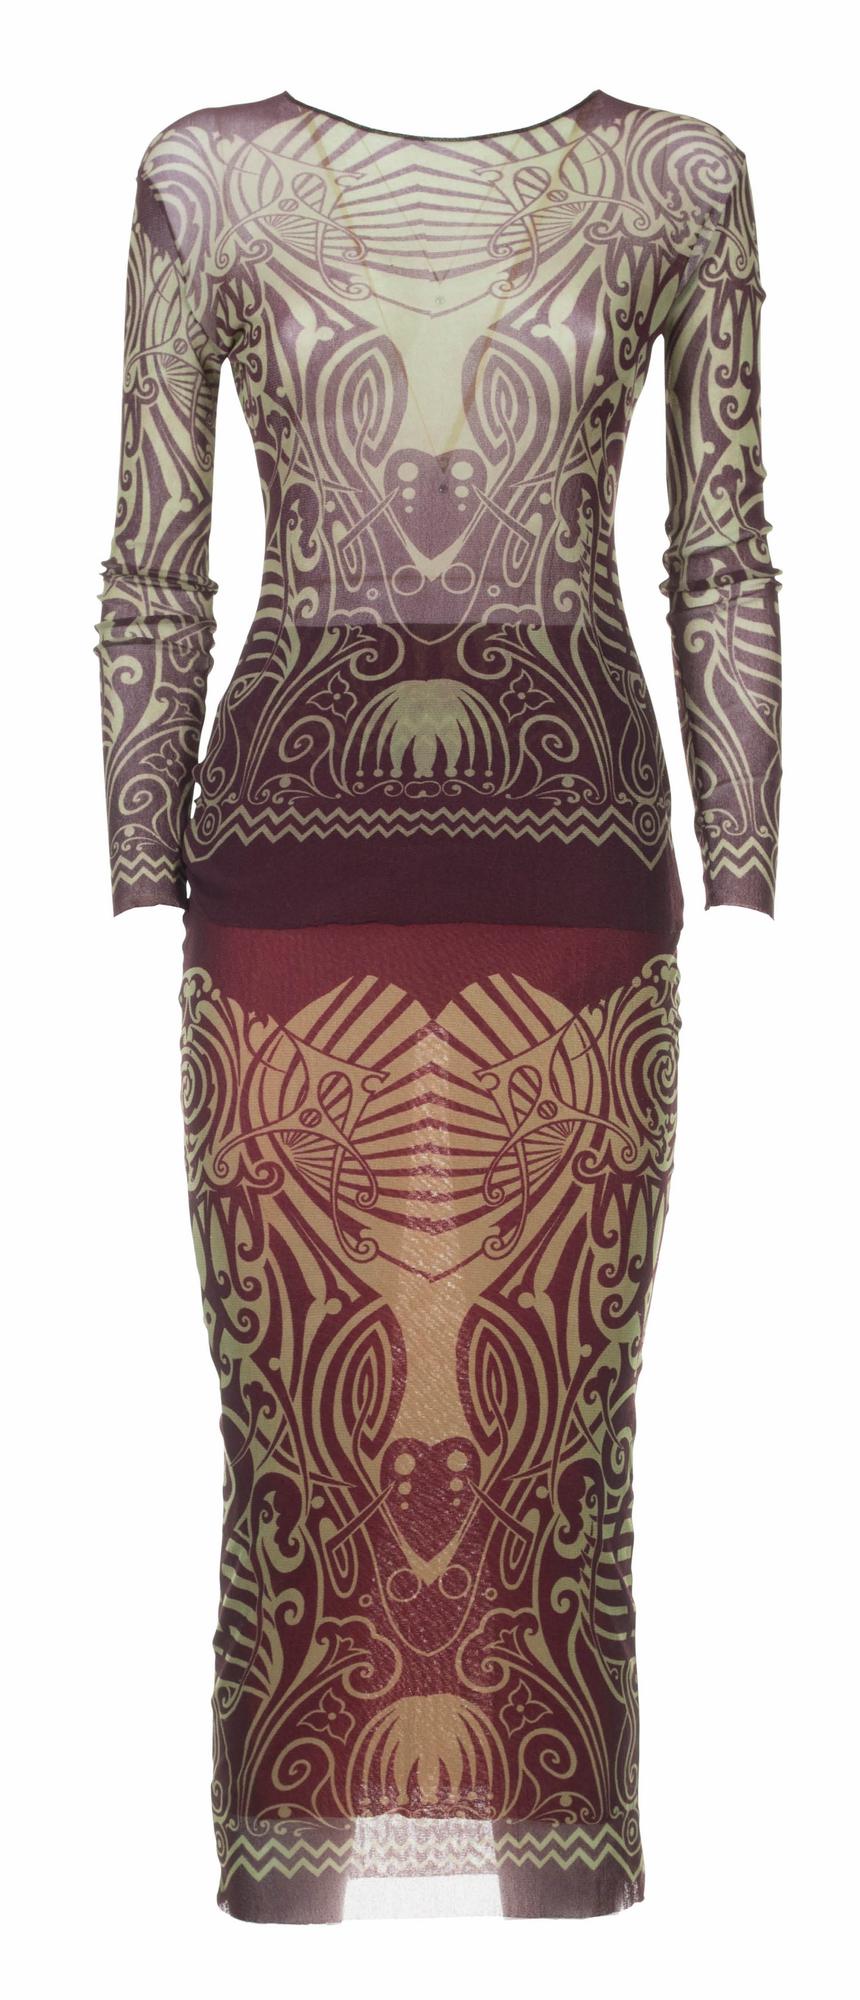 Jean Paul Gaultier ICONIC TATTOO MESH SUIT DESCRIPTION: Iconic burgundy and...